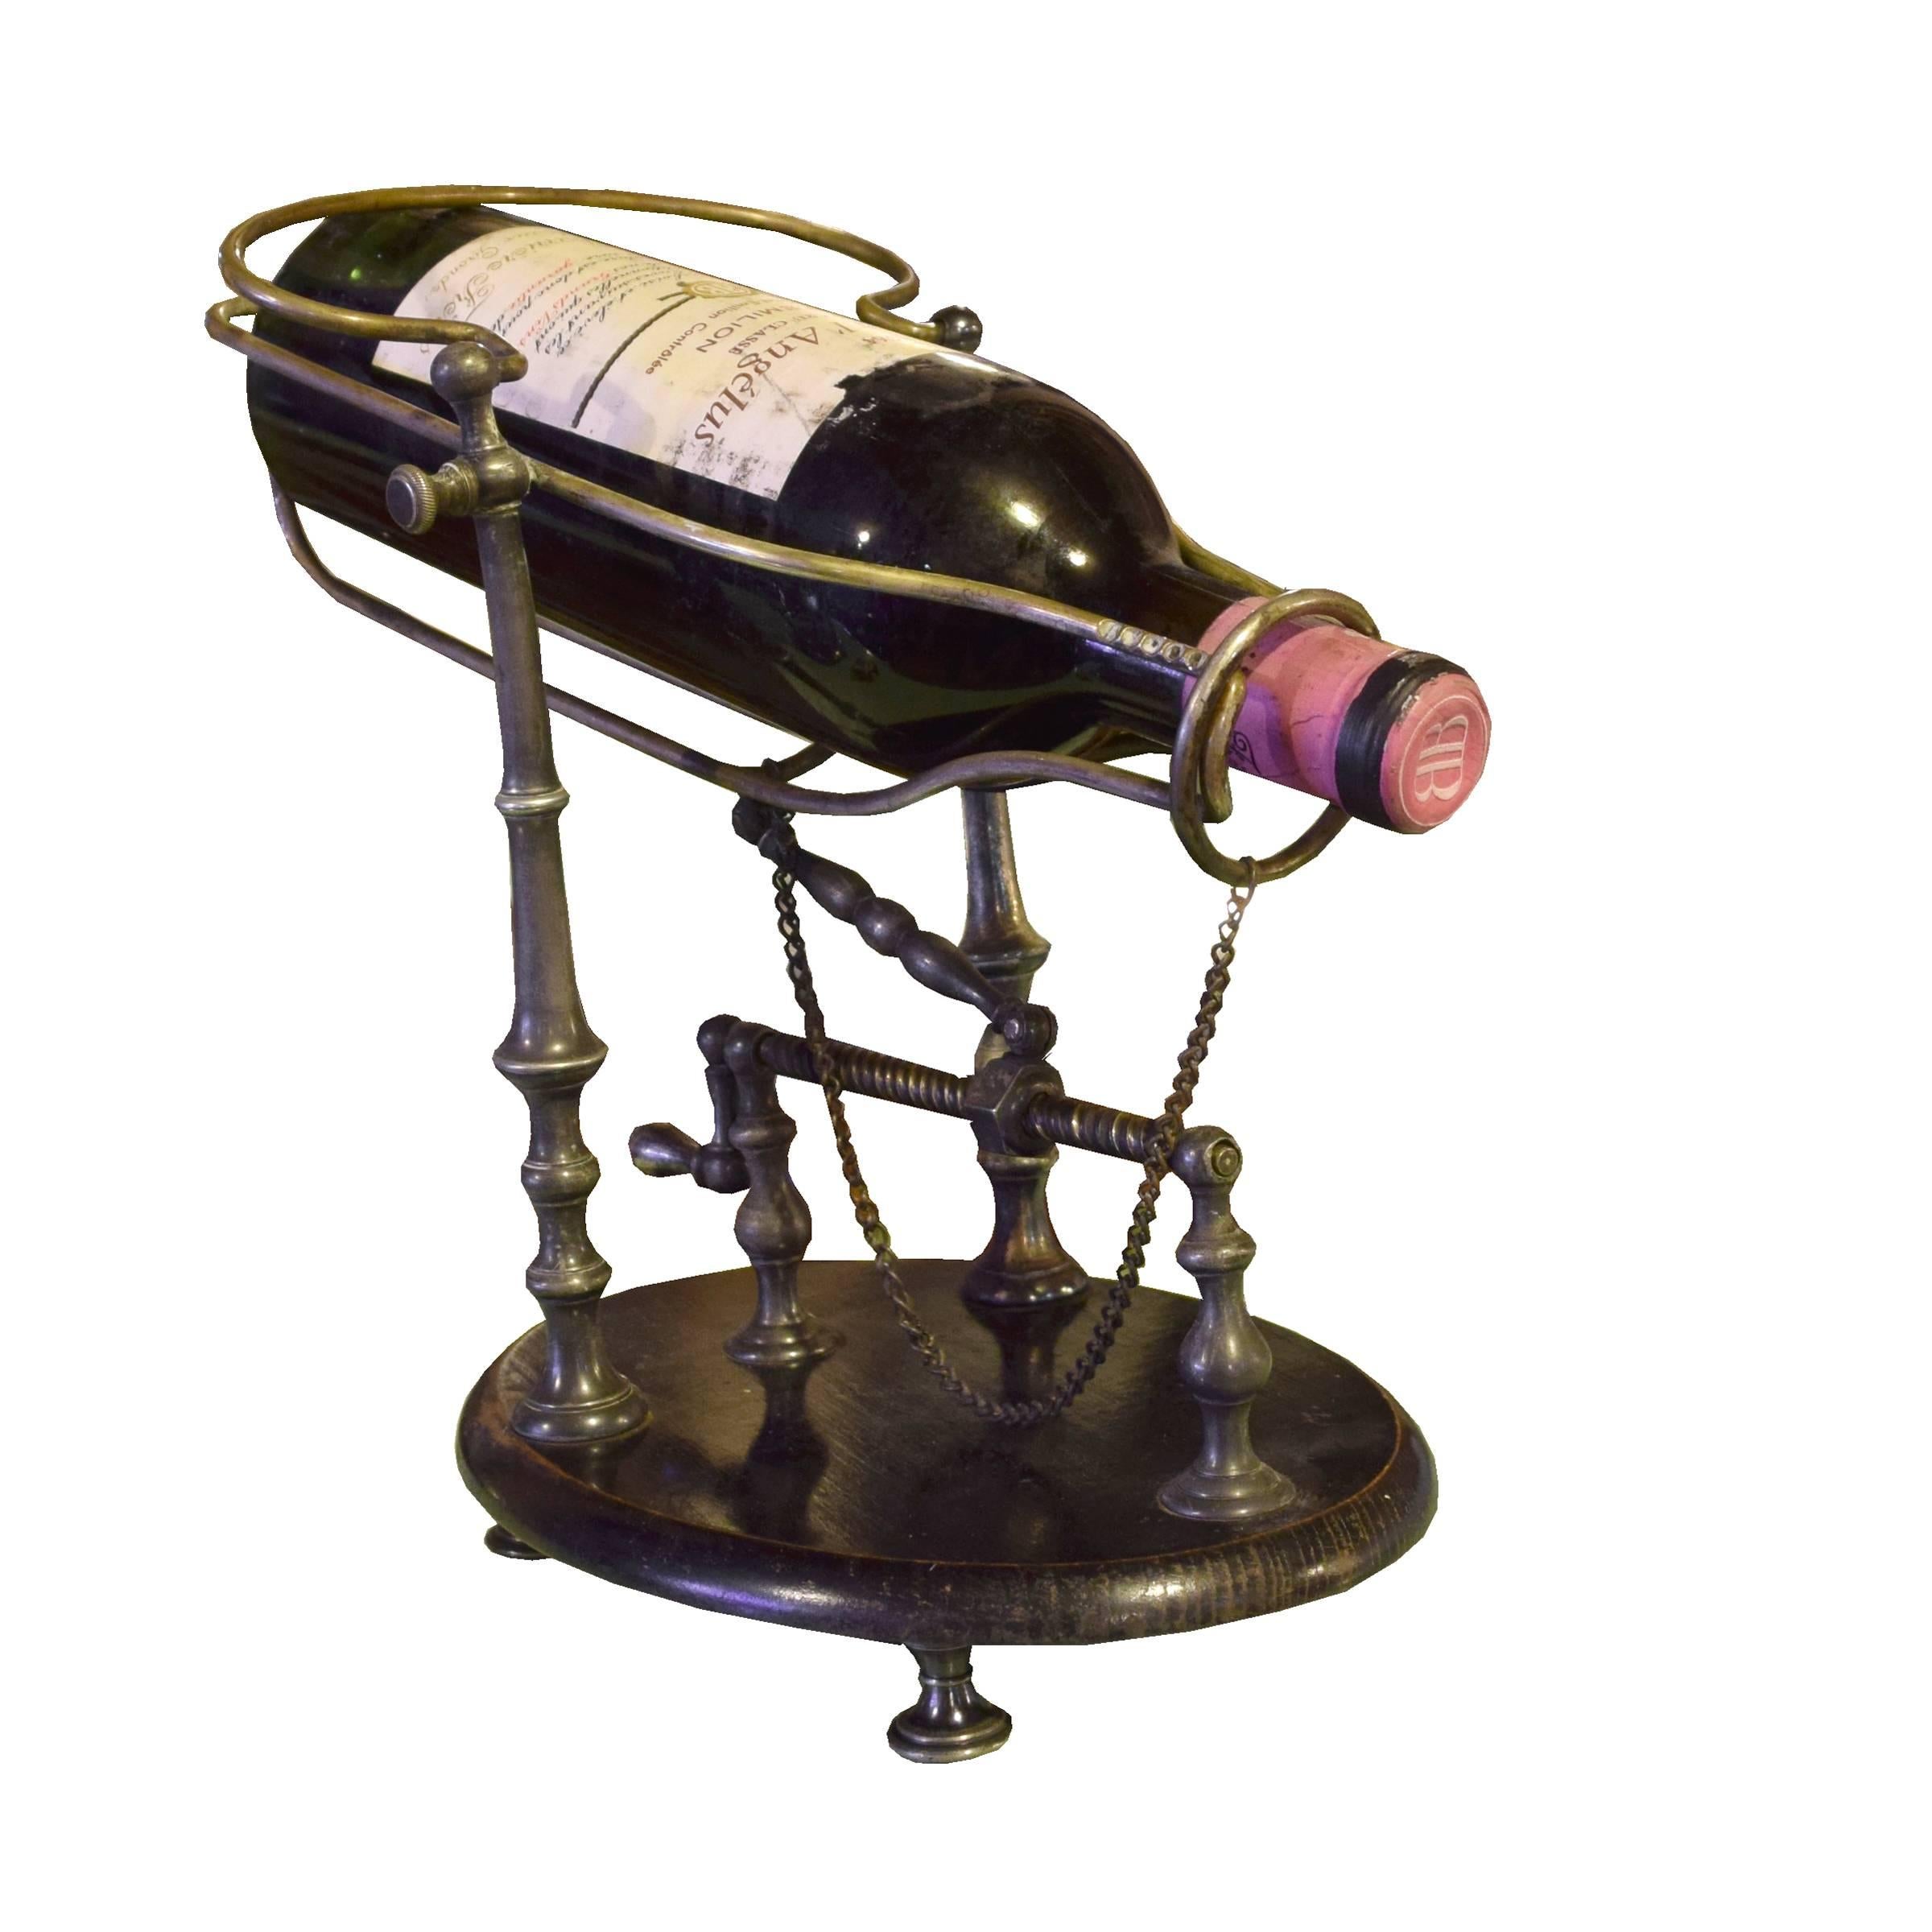 A fantastic French wine decanting cradle with a brass bottle cradle and wood base with brass feet. Turning the handle activates the cradle, bringing it forward and tilting it to achieve the perfect angle for pouring while keeping any sediment in the